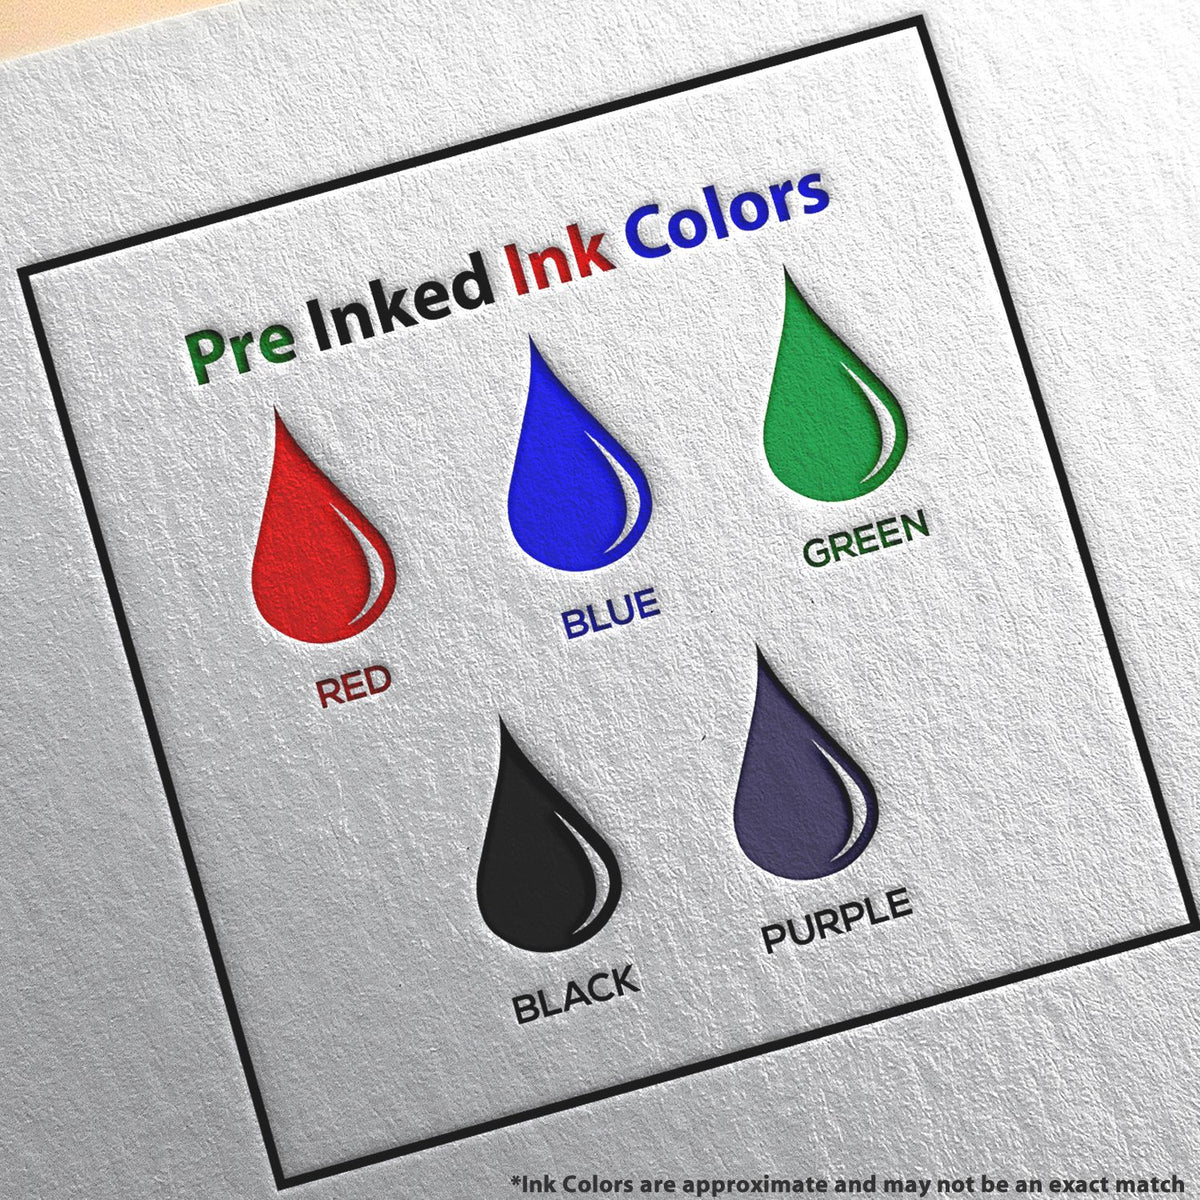 A picture showing the different ink colors or hues available for the MaxLight Premium Pre-Inked California State Seal Notarial Stamp product.